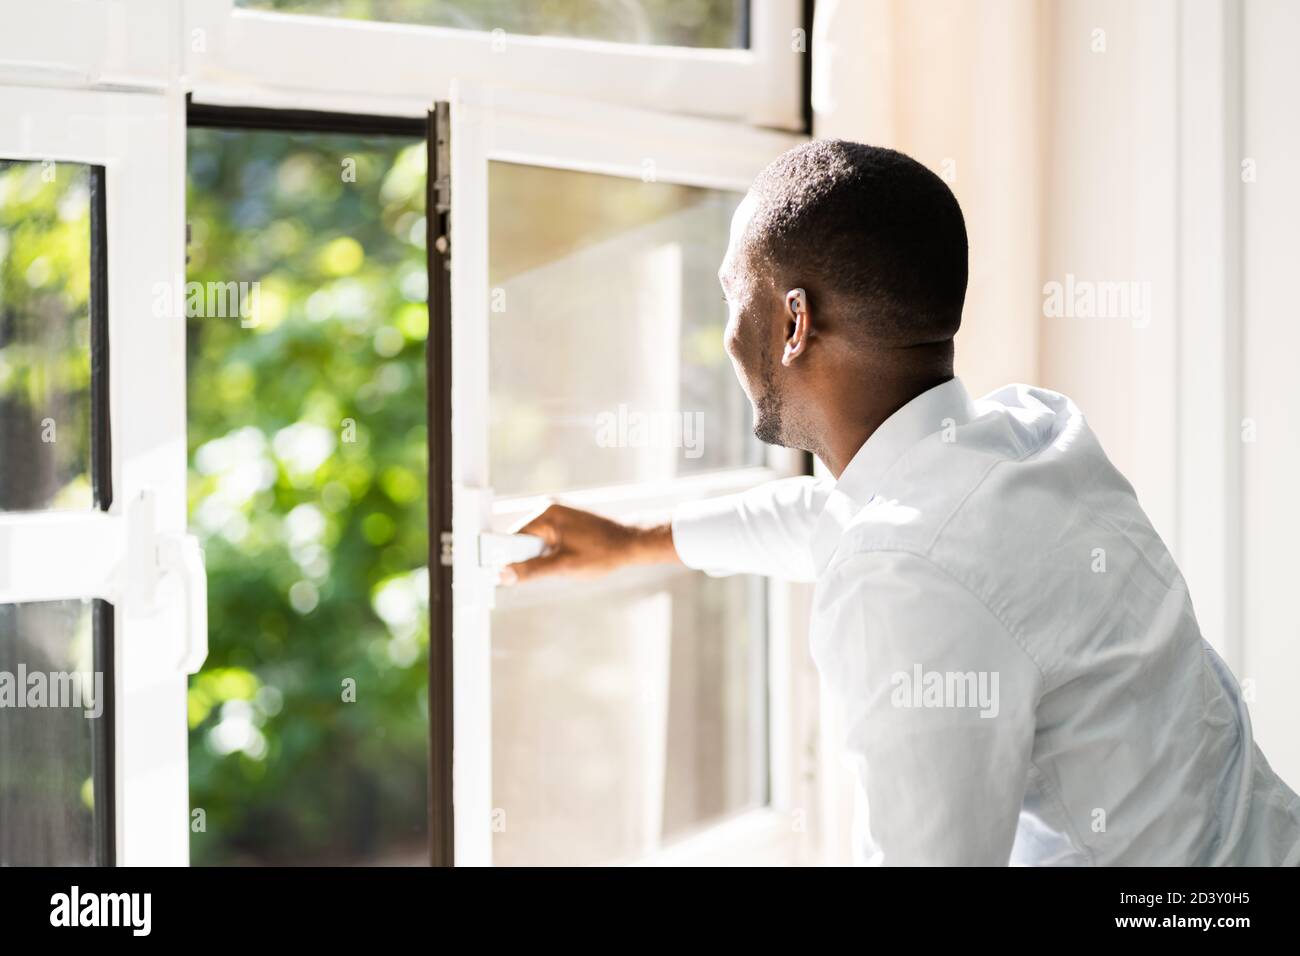 Fresh Air From Window. Side View Of Man Relaxing Stock Photo